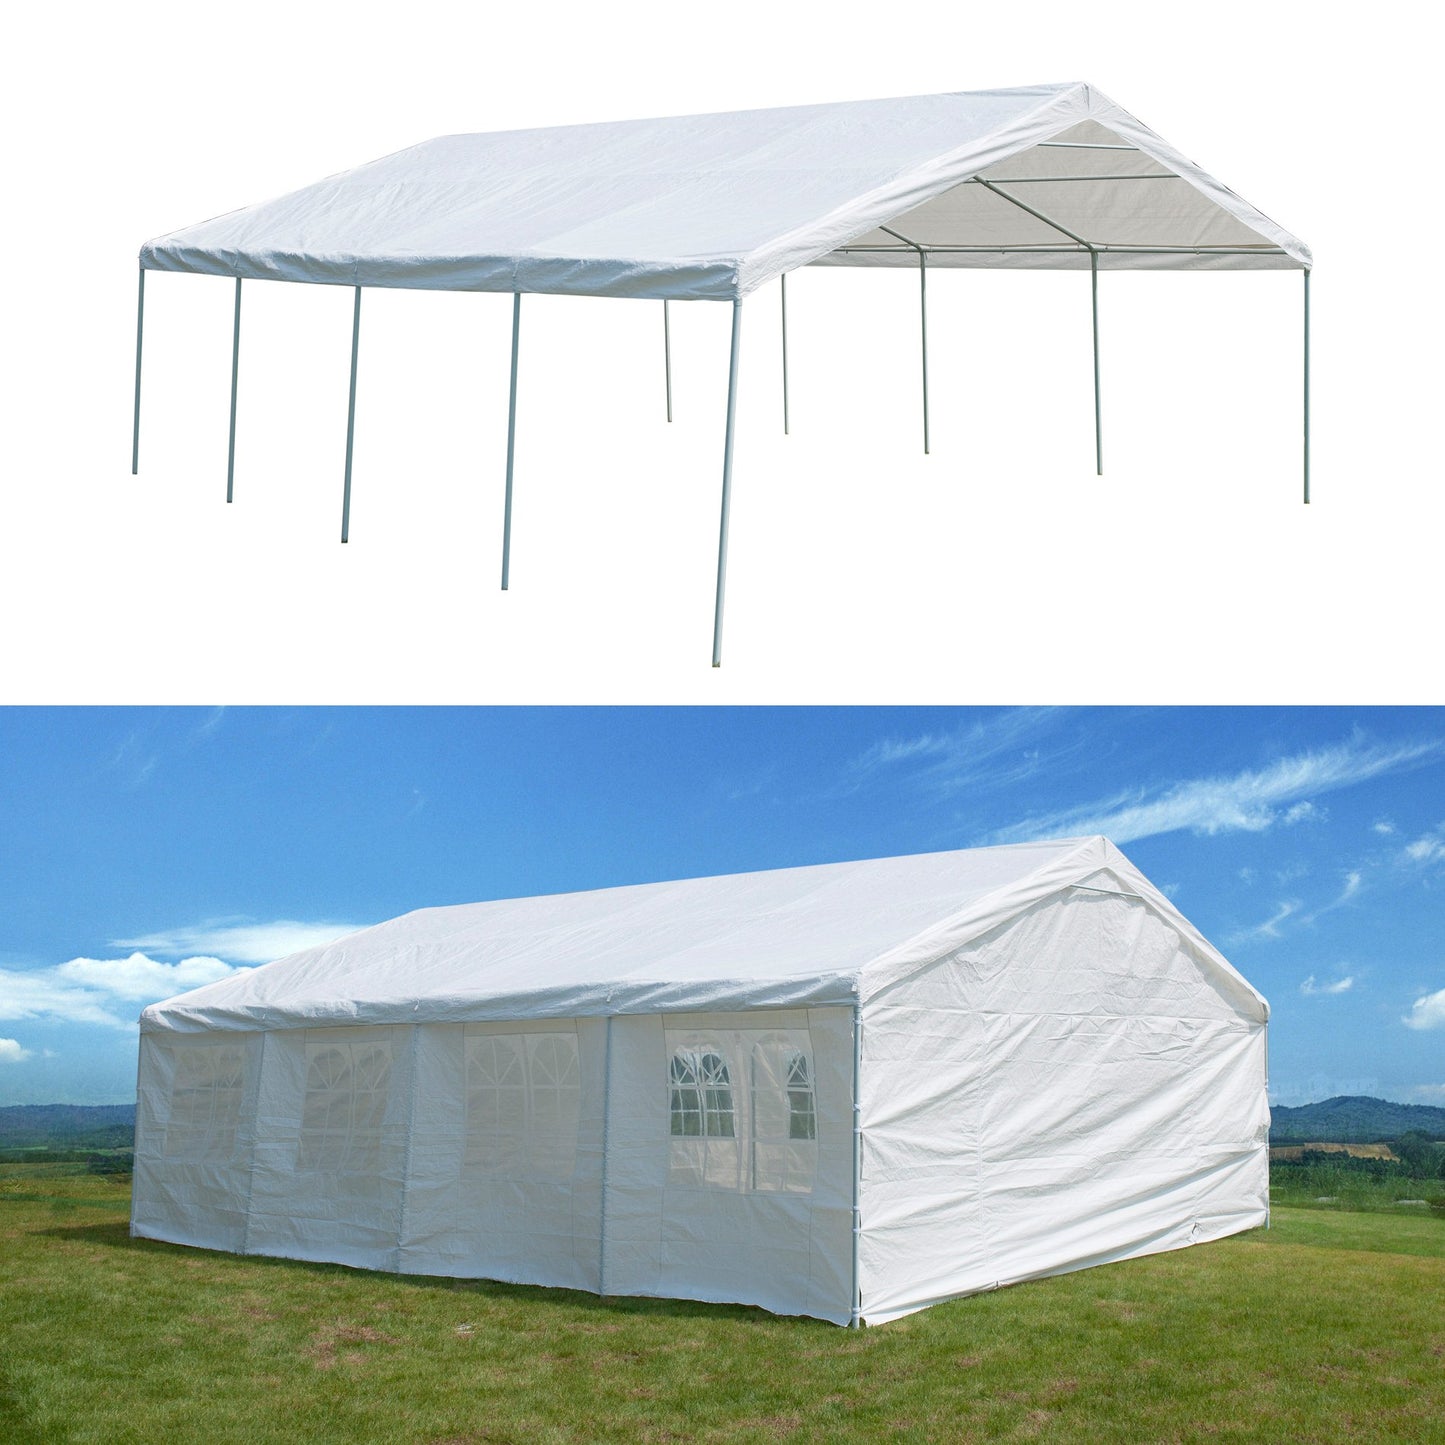 GOJOOASIS 20 x 26 ft Carport Outdoor Metal Commercial Wedding Party Frame Tent w/Sidewalls 4 Rooms 6 x 8